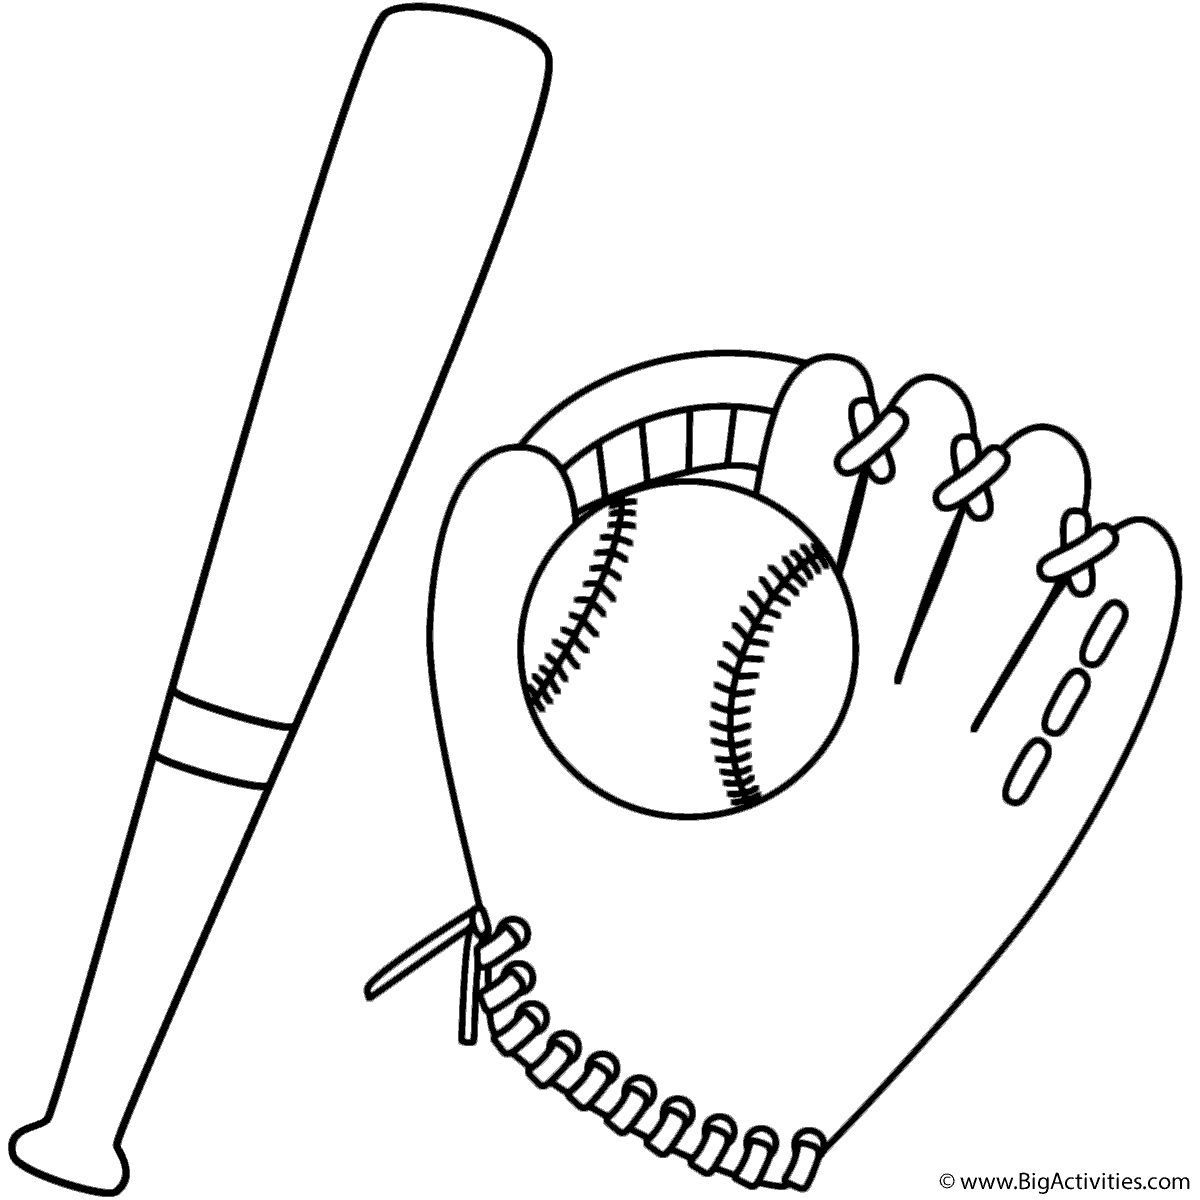 Bat and Baseball in Glove - Coloring Page (Sports)